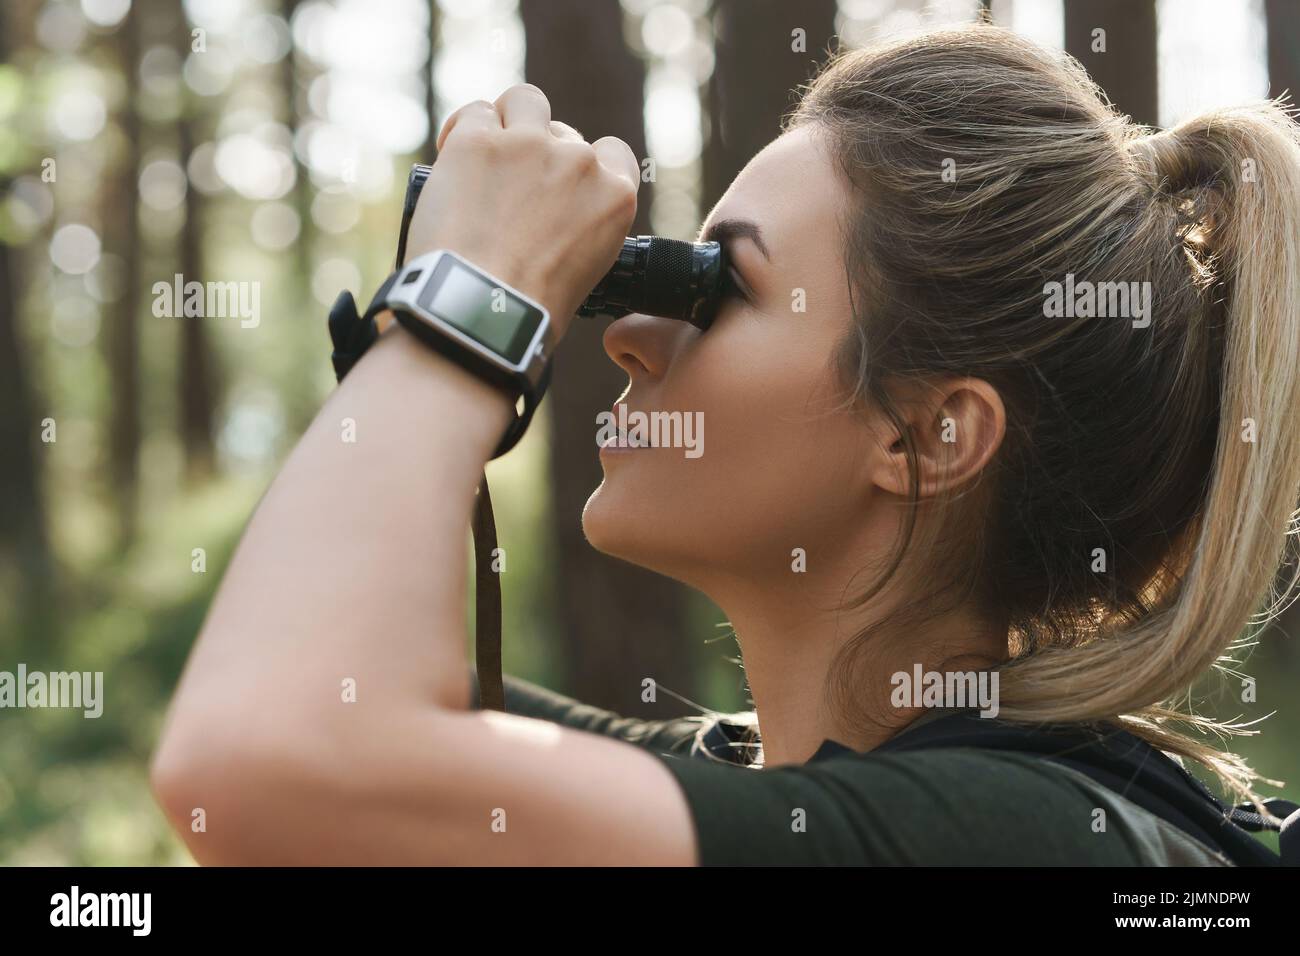 Female hiker is using binoculars for bird watching in green forest Stock Photo